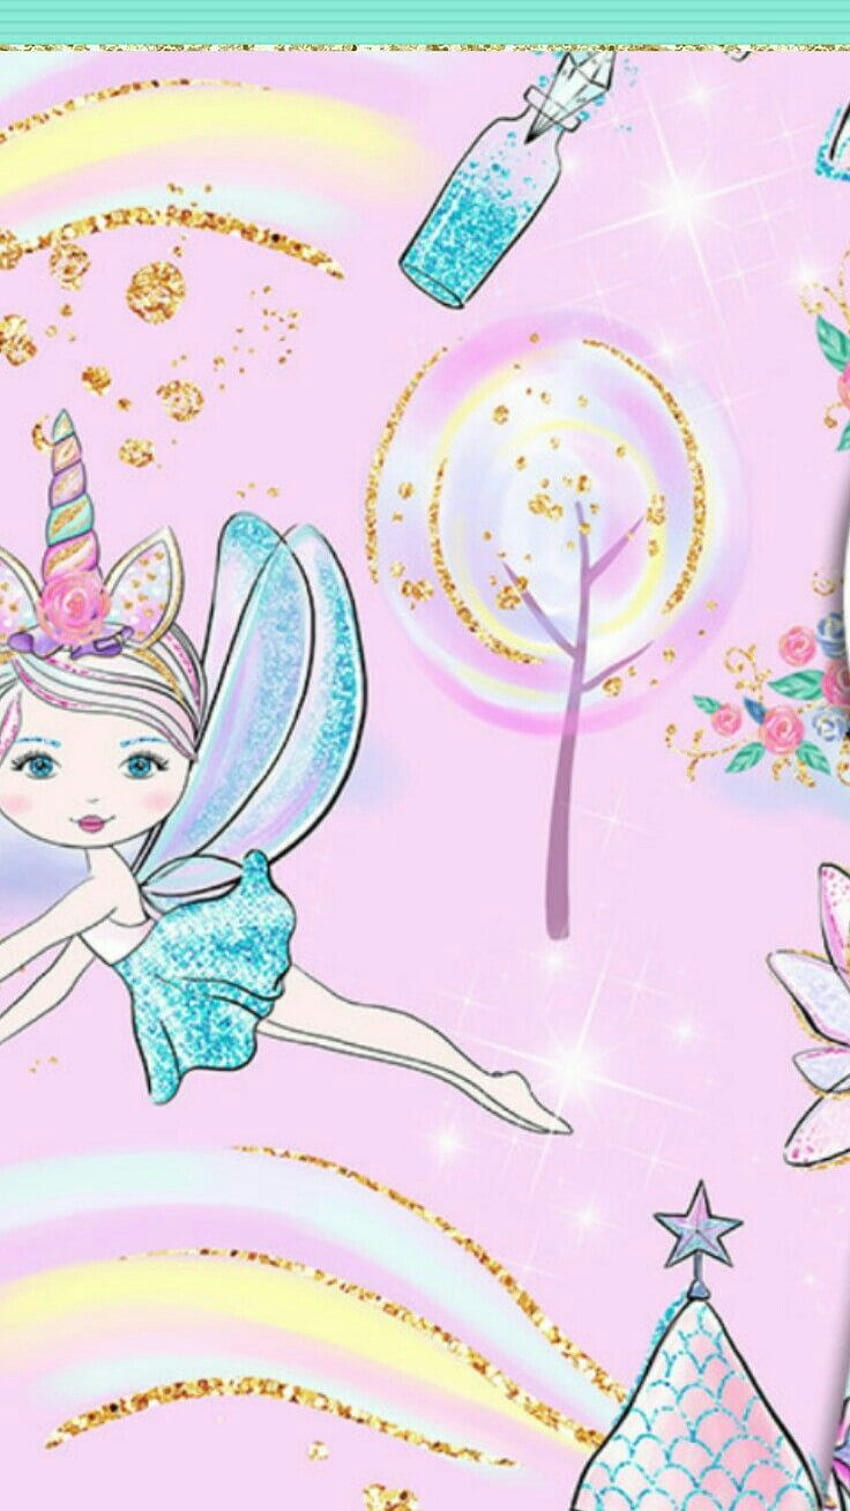 Fairy Unicorn Live Wallpaper Free Android Live Wallpaper download   Download the Free Fairy Unicorn Live Wallpaper Live Wallpaper to your  Android phone or tablet